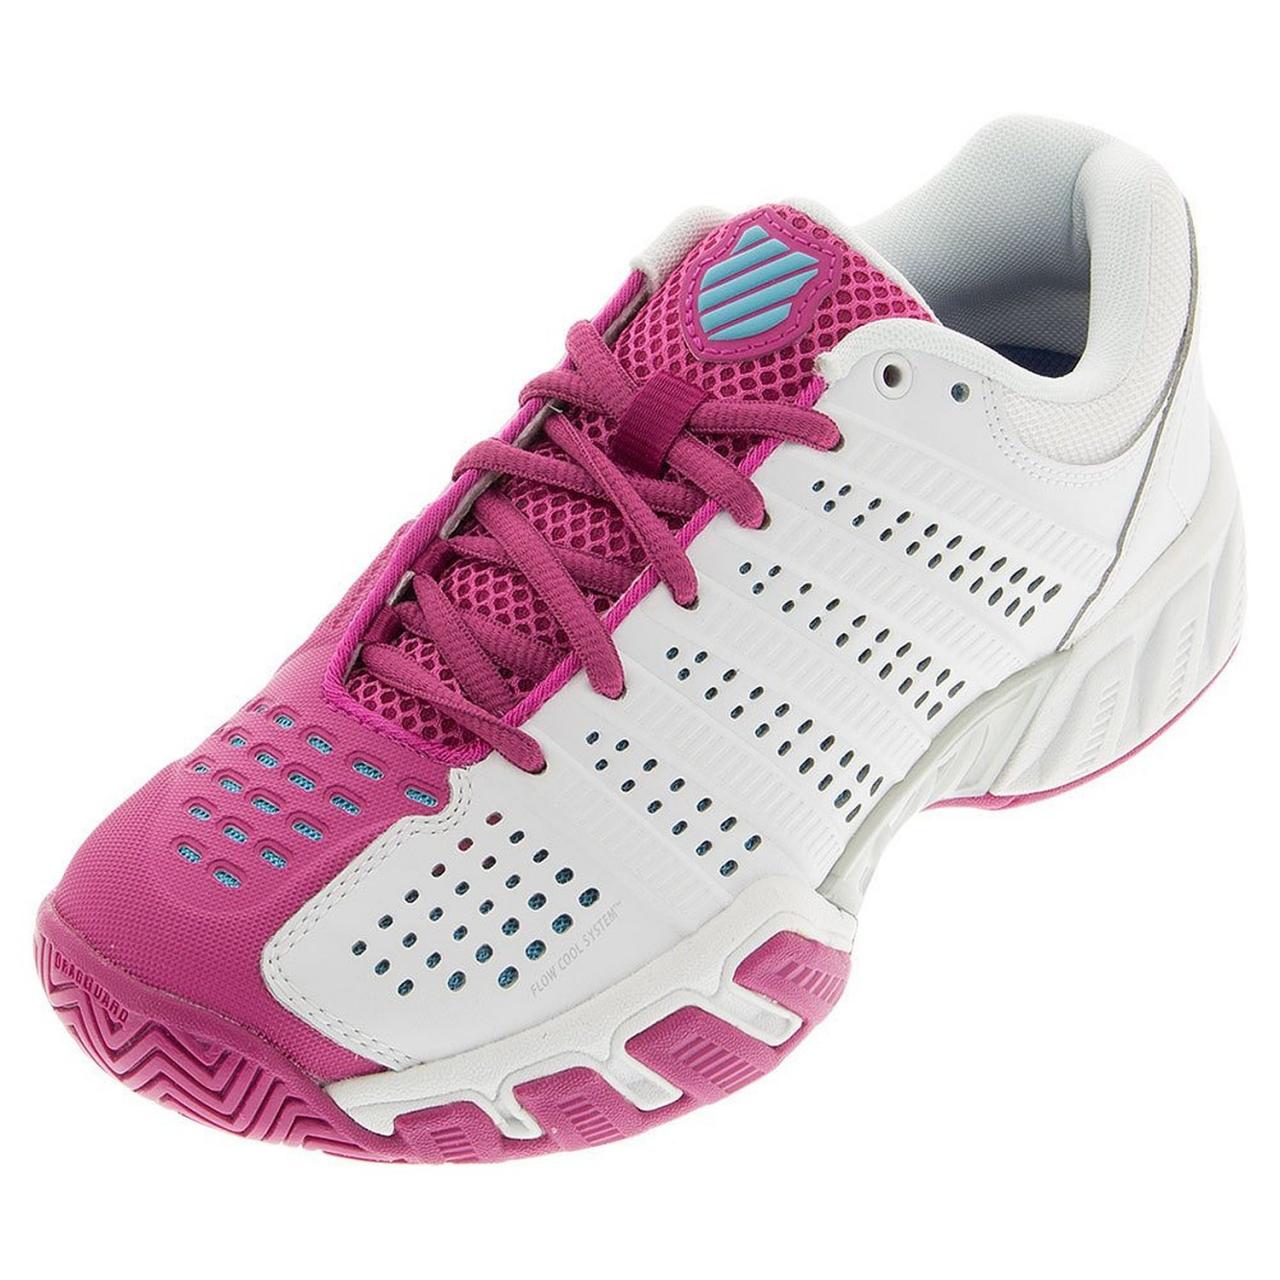 Top 10 Best/Most Comfortable Tennis Shoes For Women